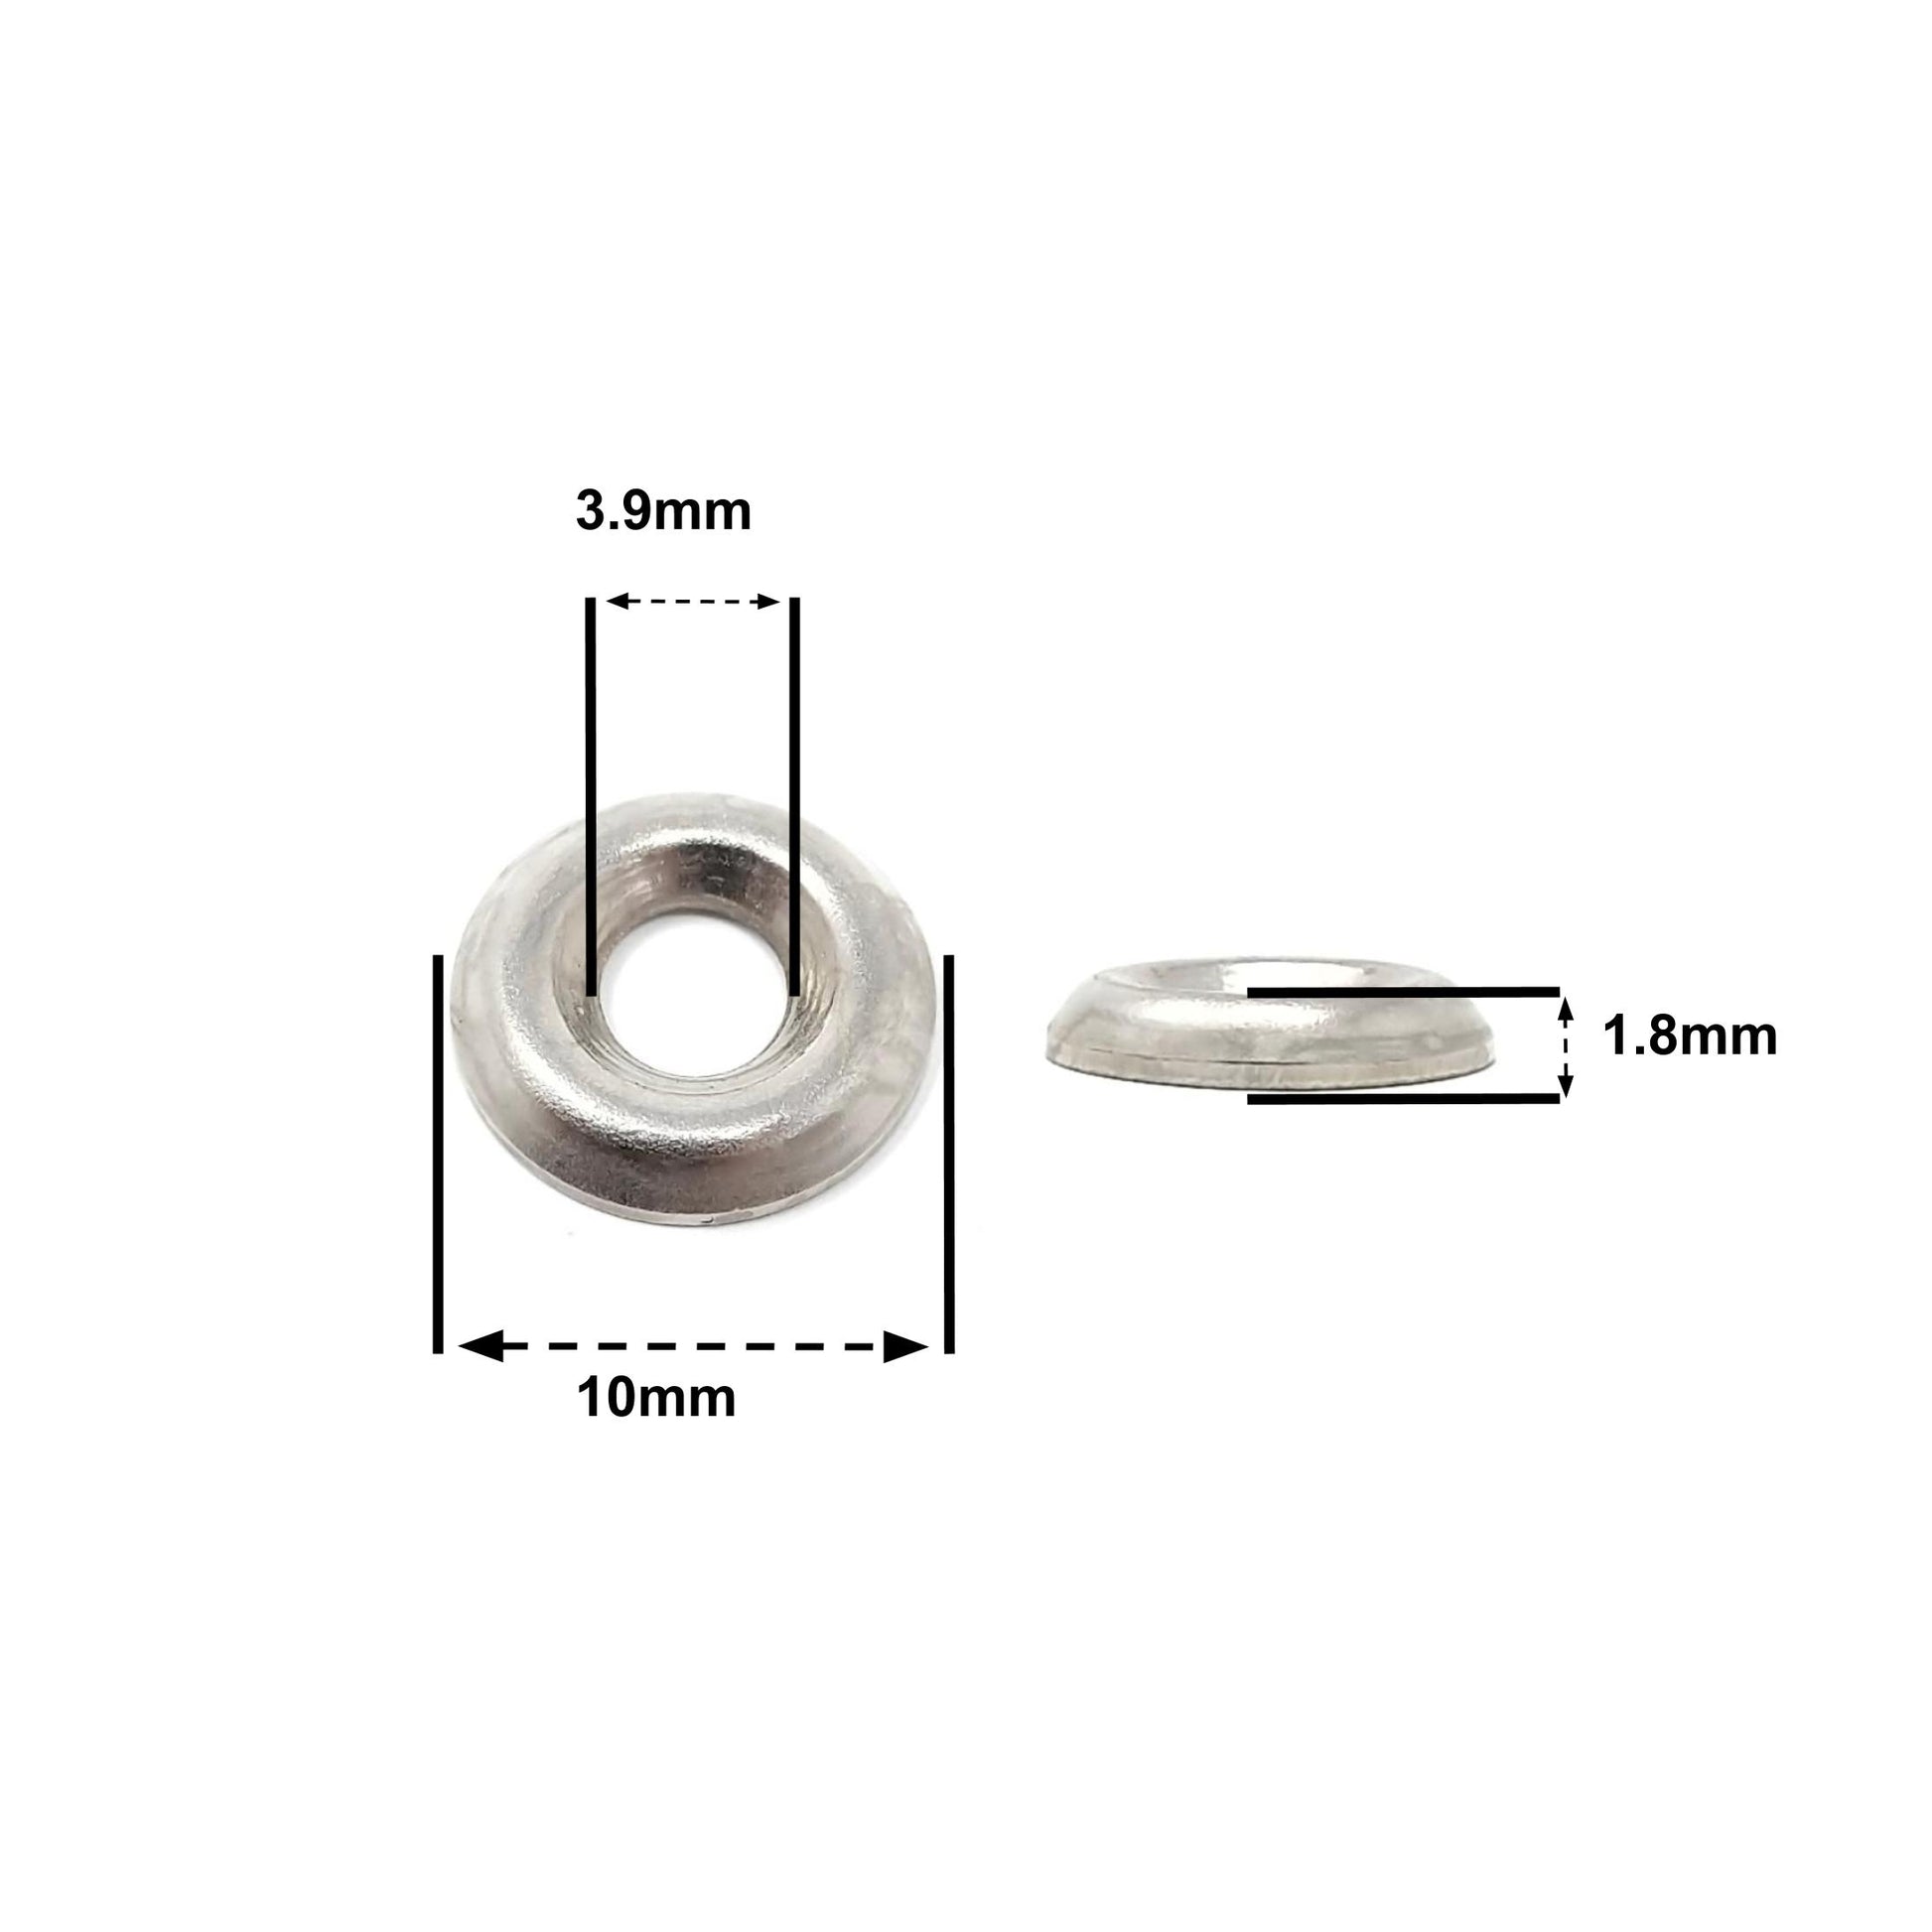 3.9mm Rosette Washers For Screws - Nickel Plated Steel, Made In Germany - Keay Vital Parts